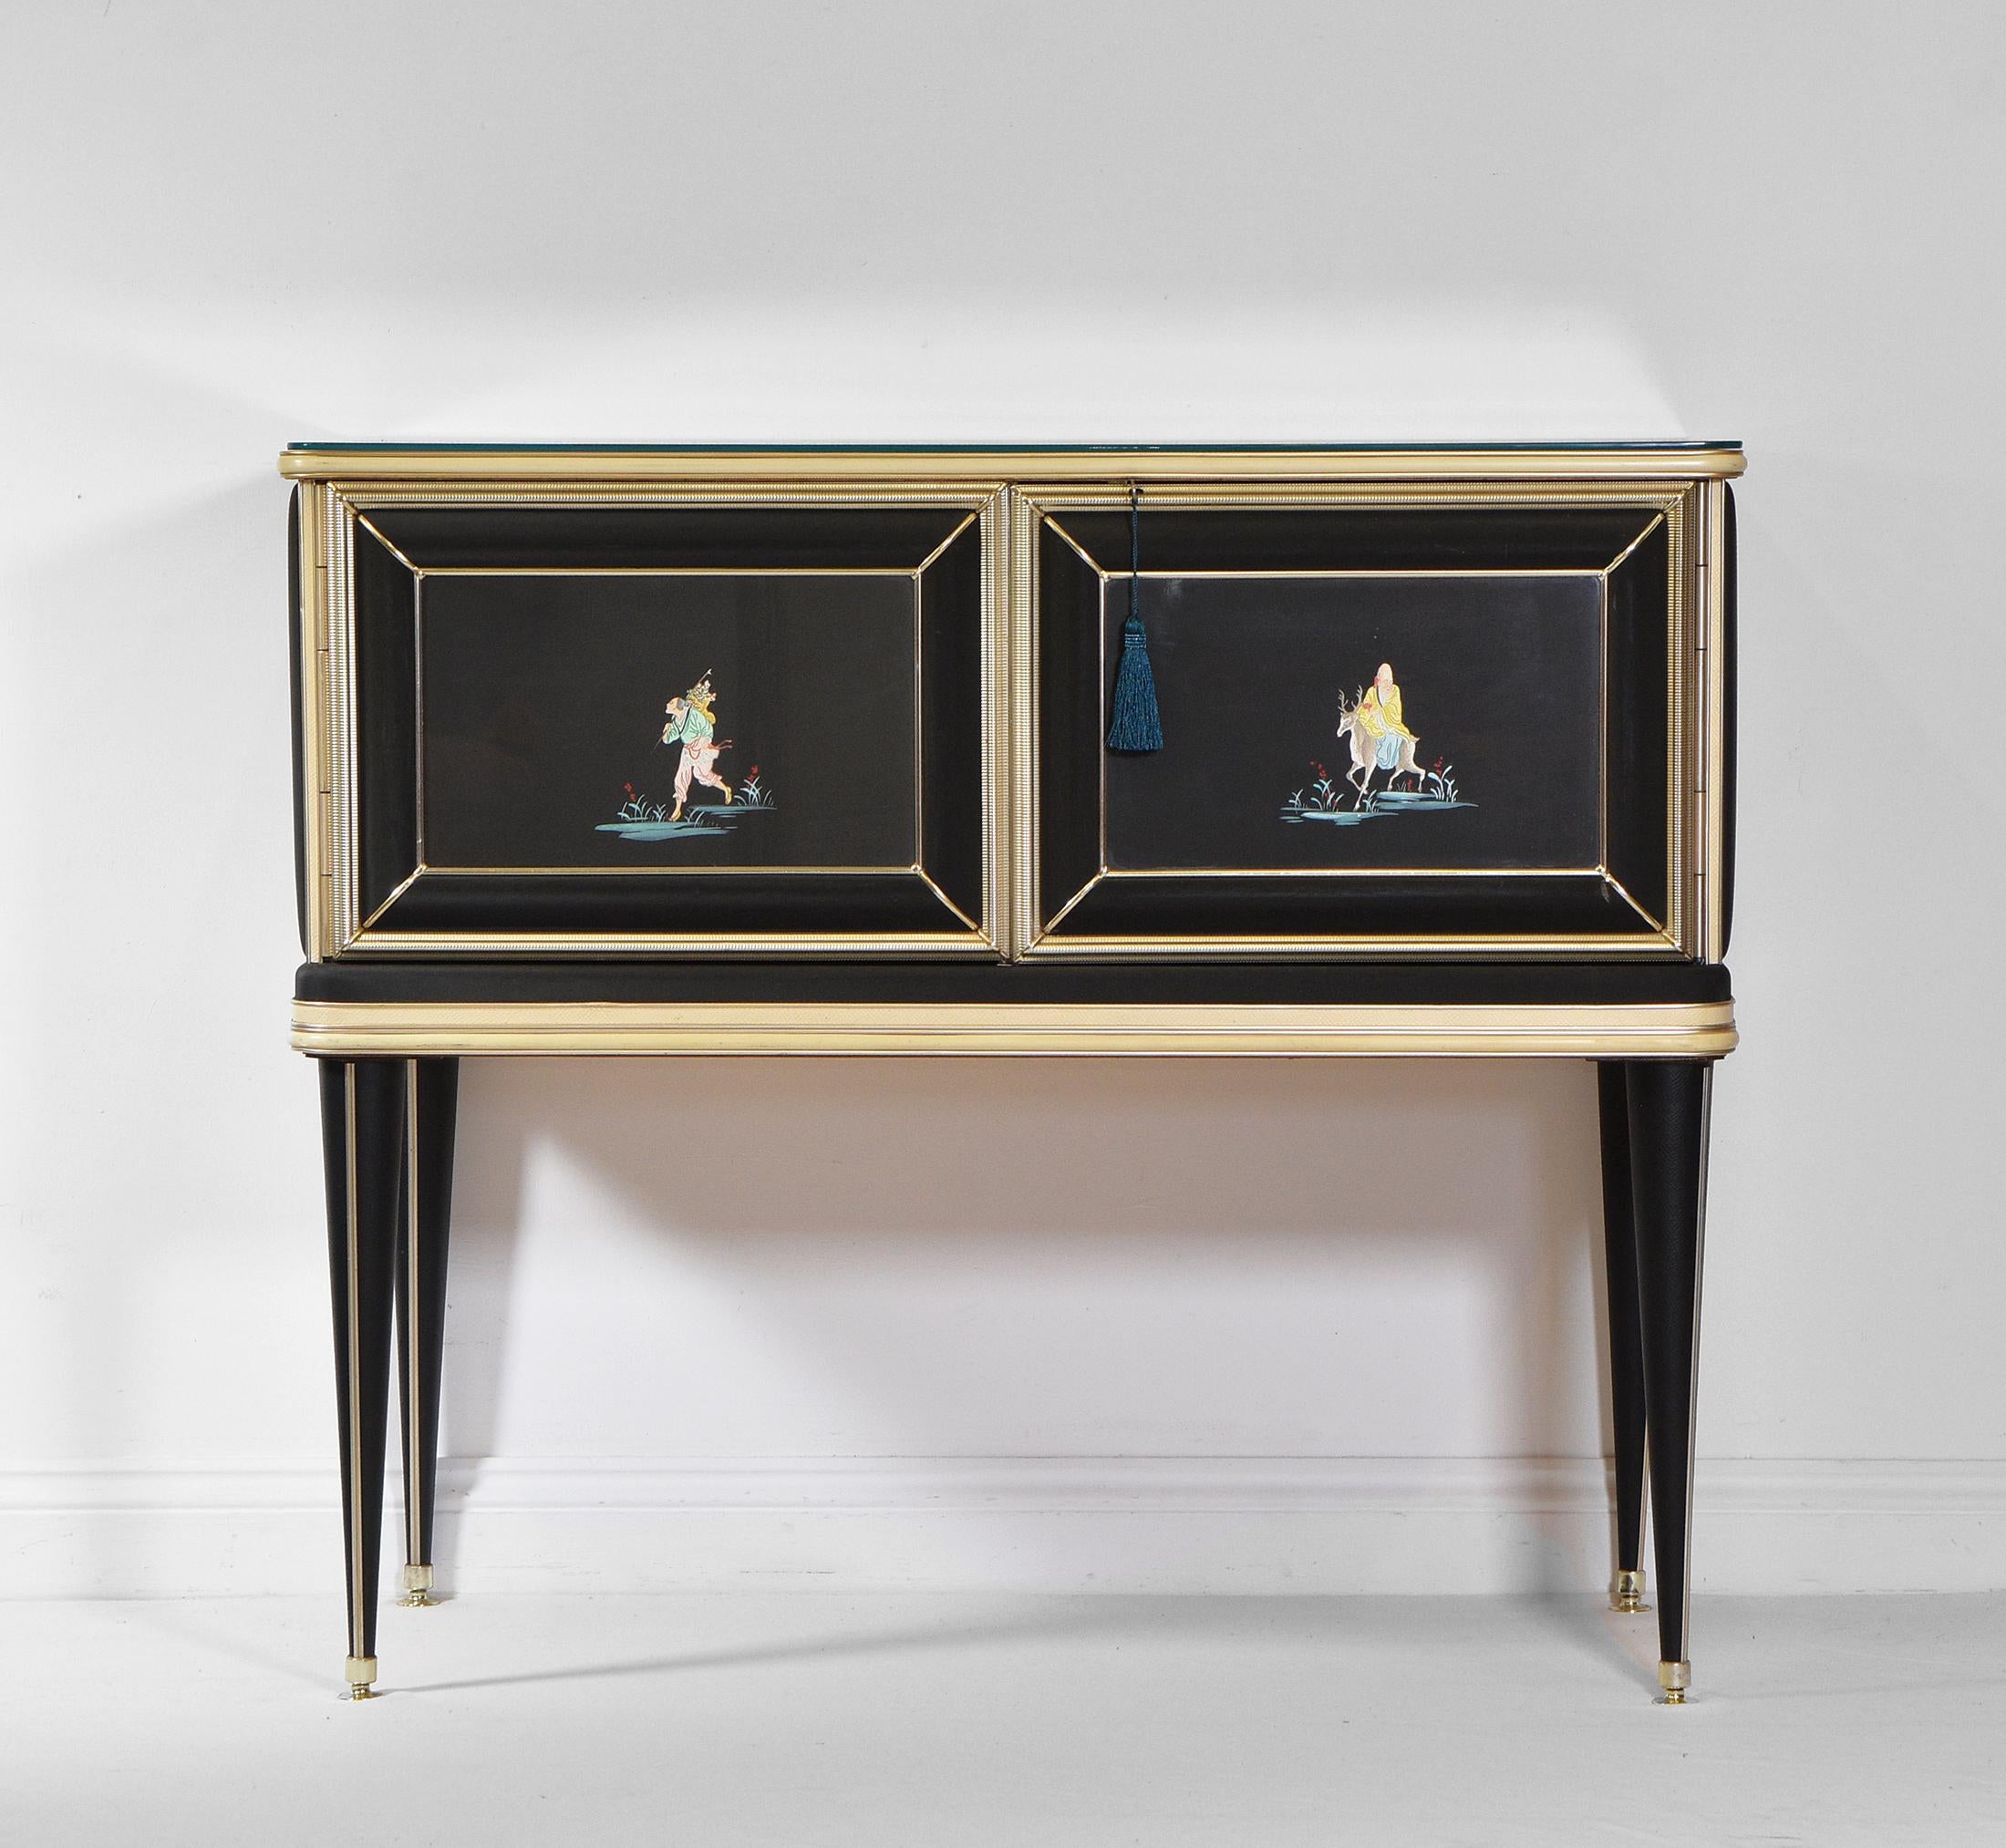 A unique mid-century Italian chinoiserie sideboard designed by Umberto Mascagni for Harrods. Circa 1960s.

*Free delivery for all areas in mainland England & Wales only. Delivery to room of choice by a two person team. Items are left packed. Please